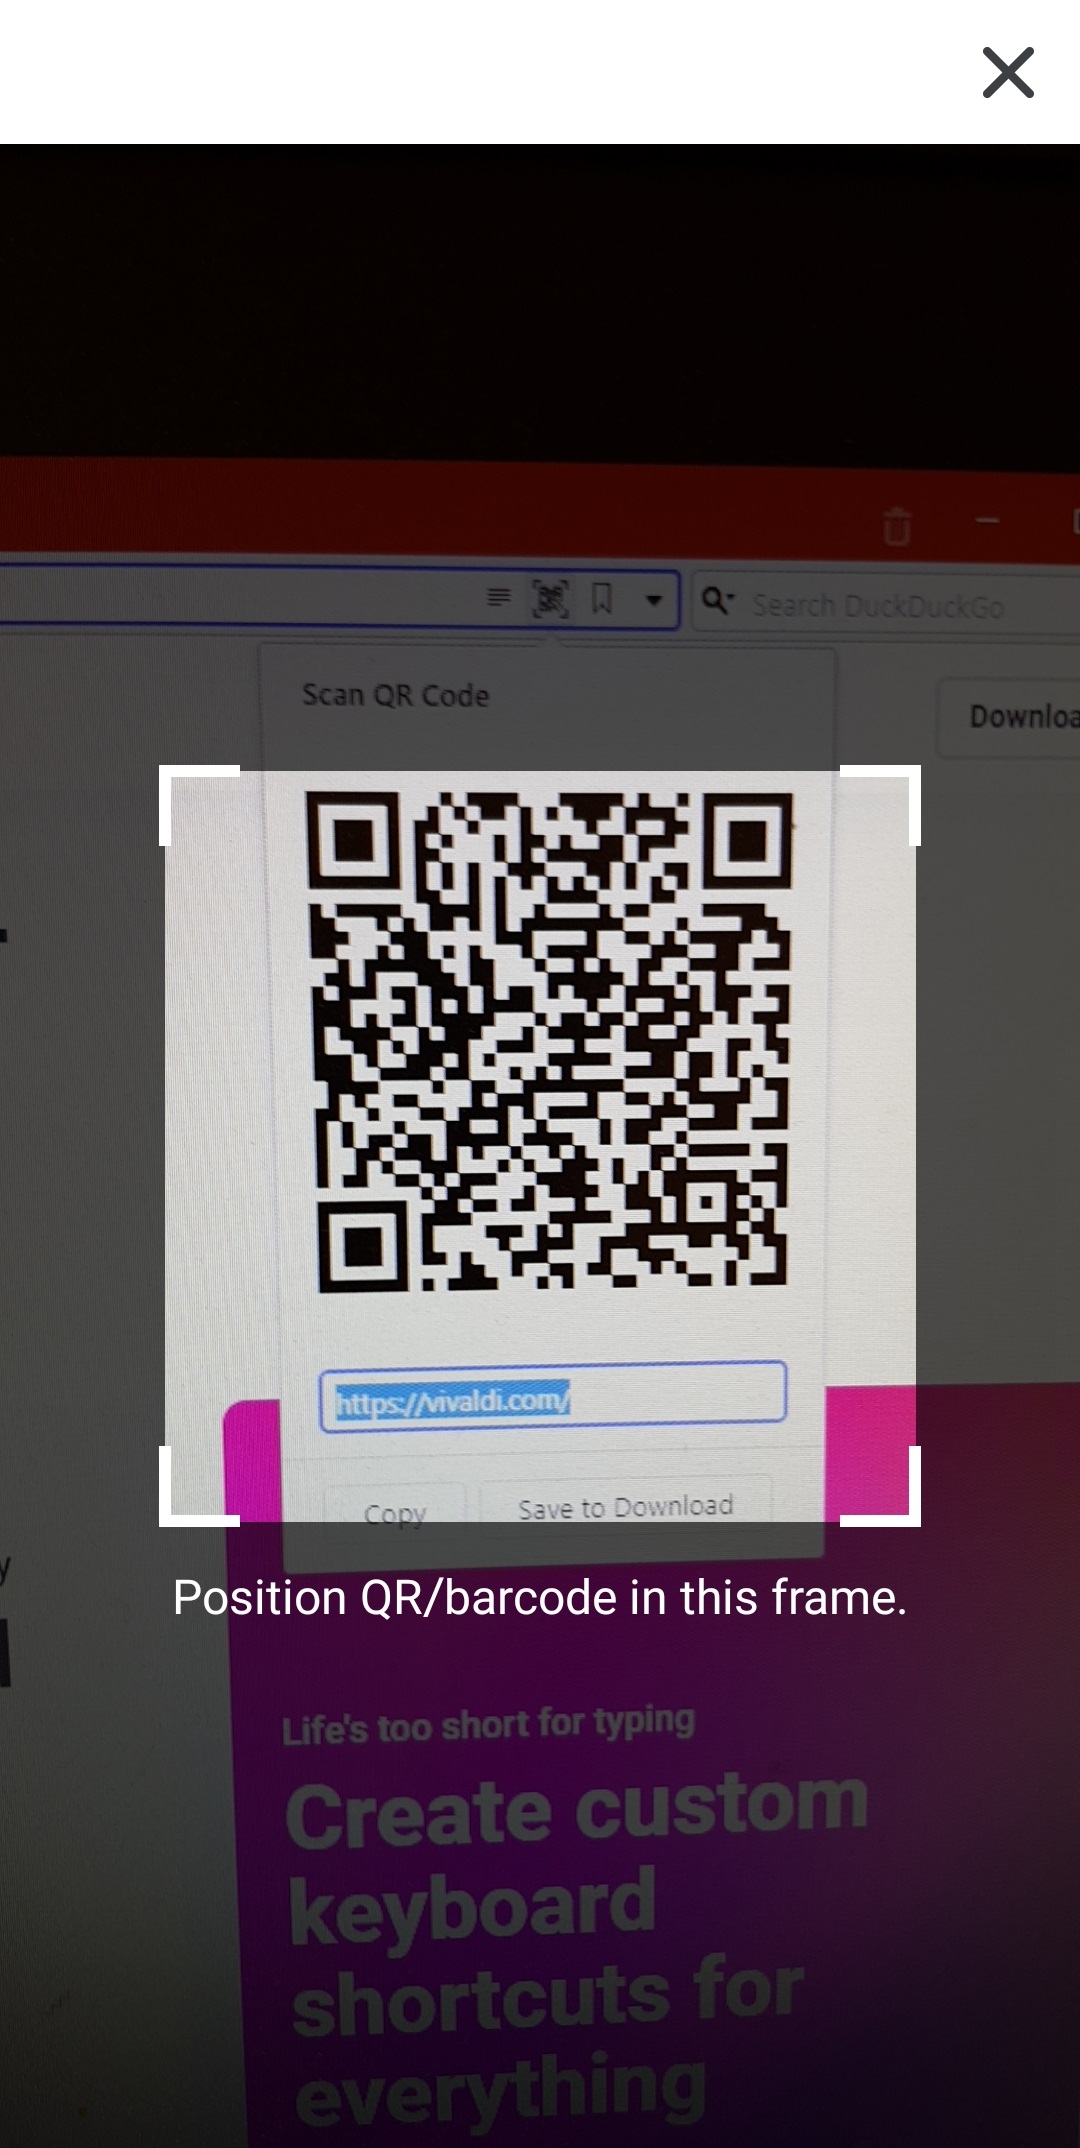 Scan QR codes with Vivaldi on Android